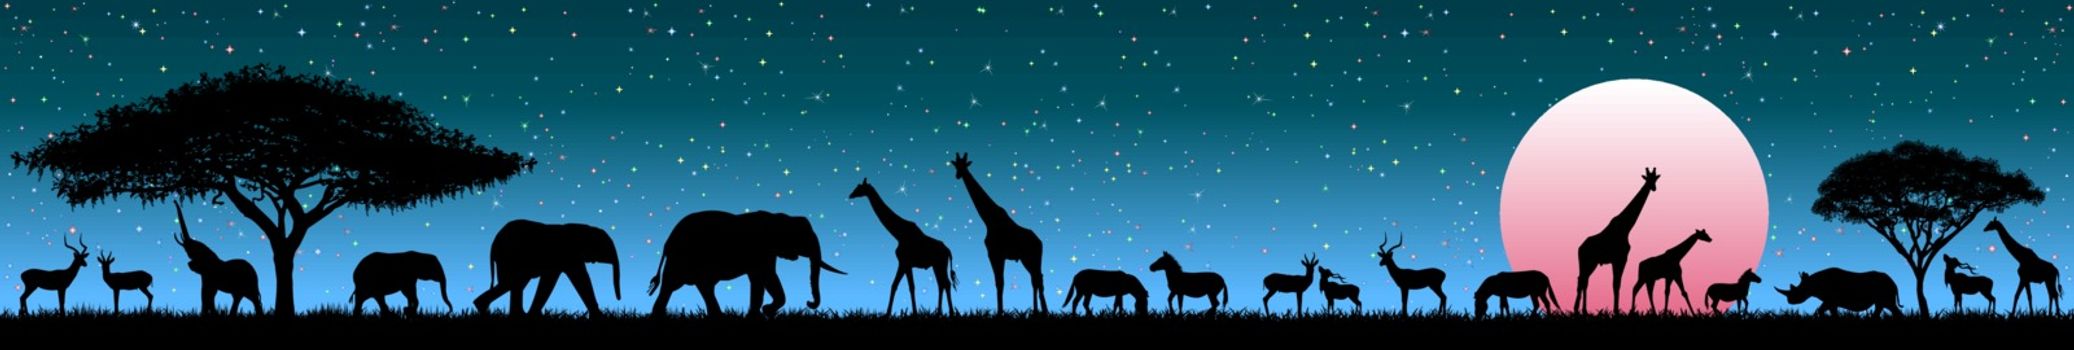 Silhouettes of wild animals of the African savannah. Set of different wild animals of Africa. African animals against the starry sky and the rising sun.